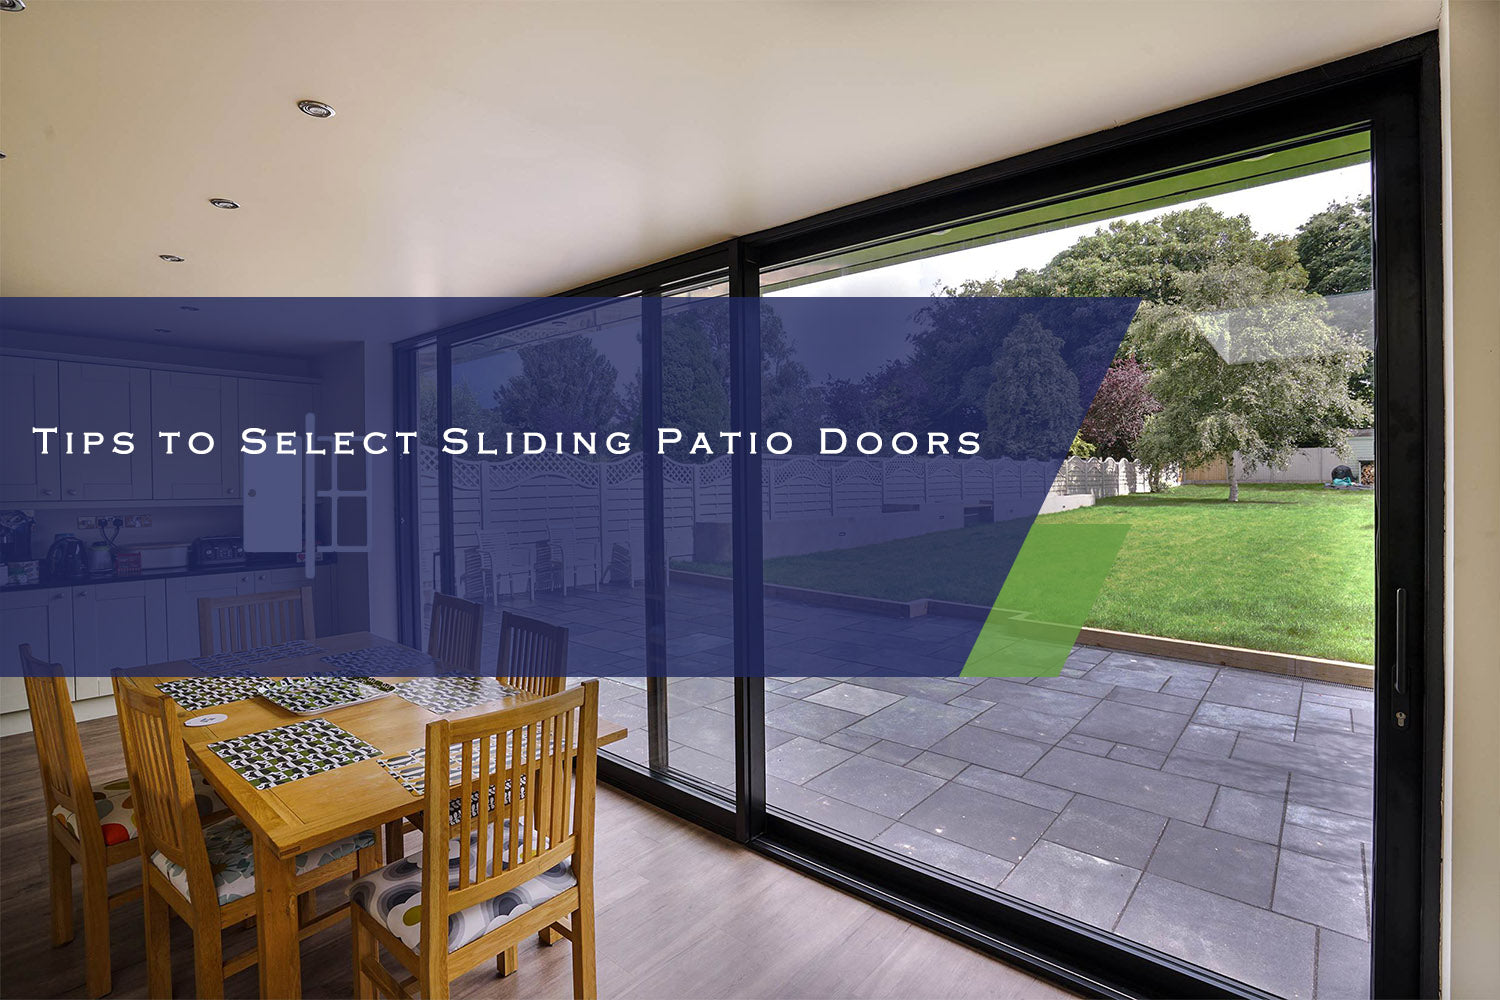 Tips to Select Sliding Patio Doors